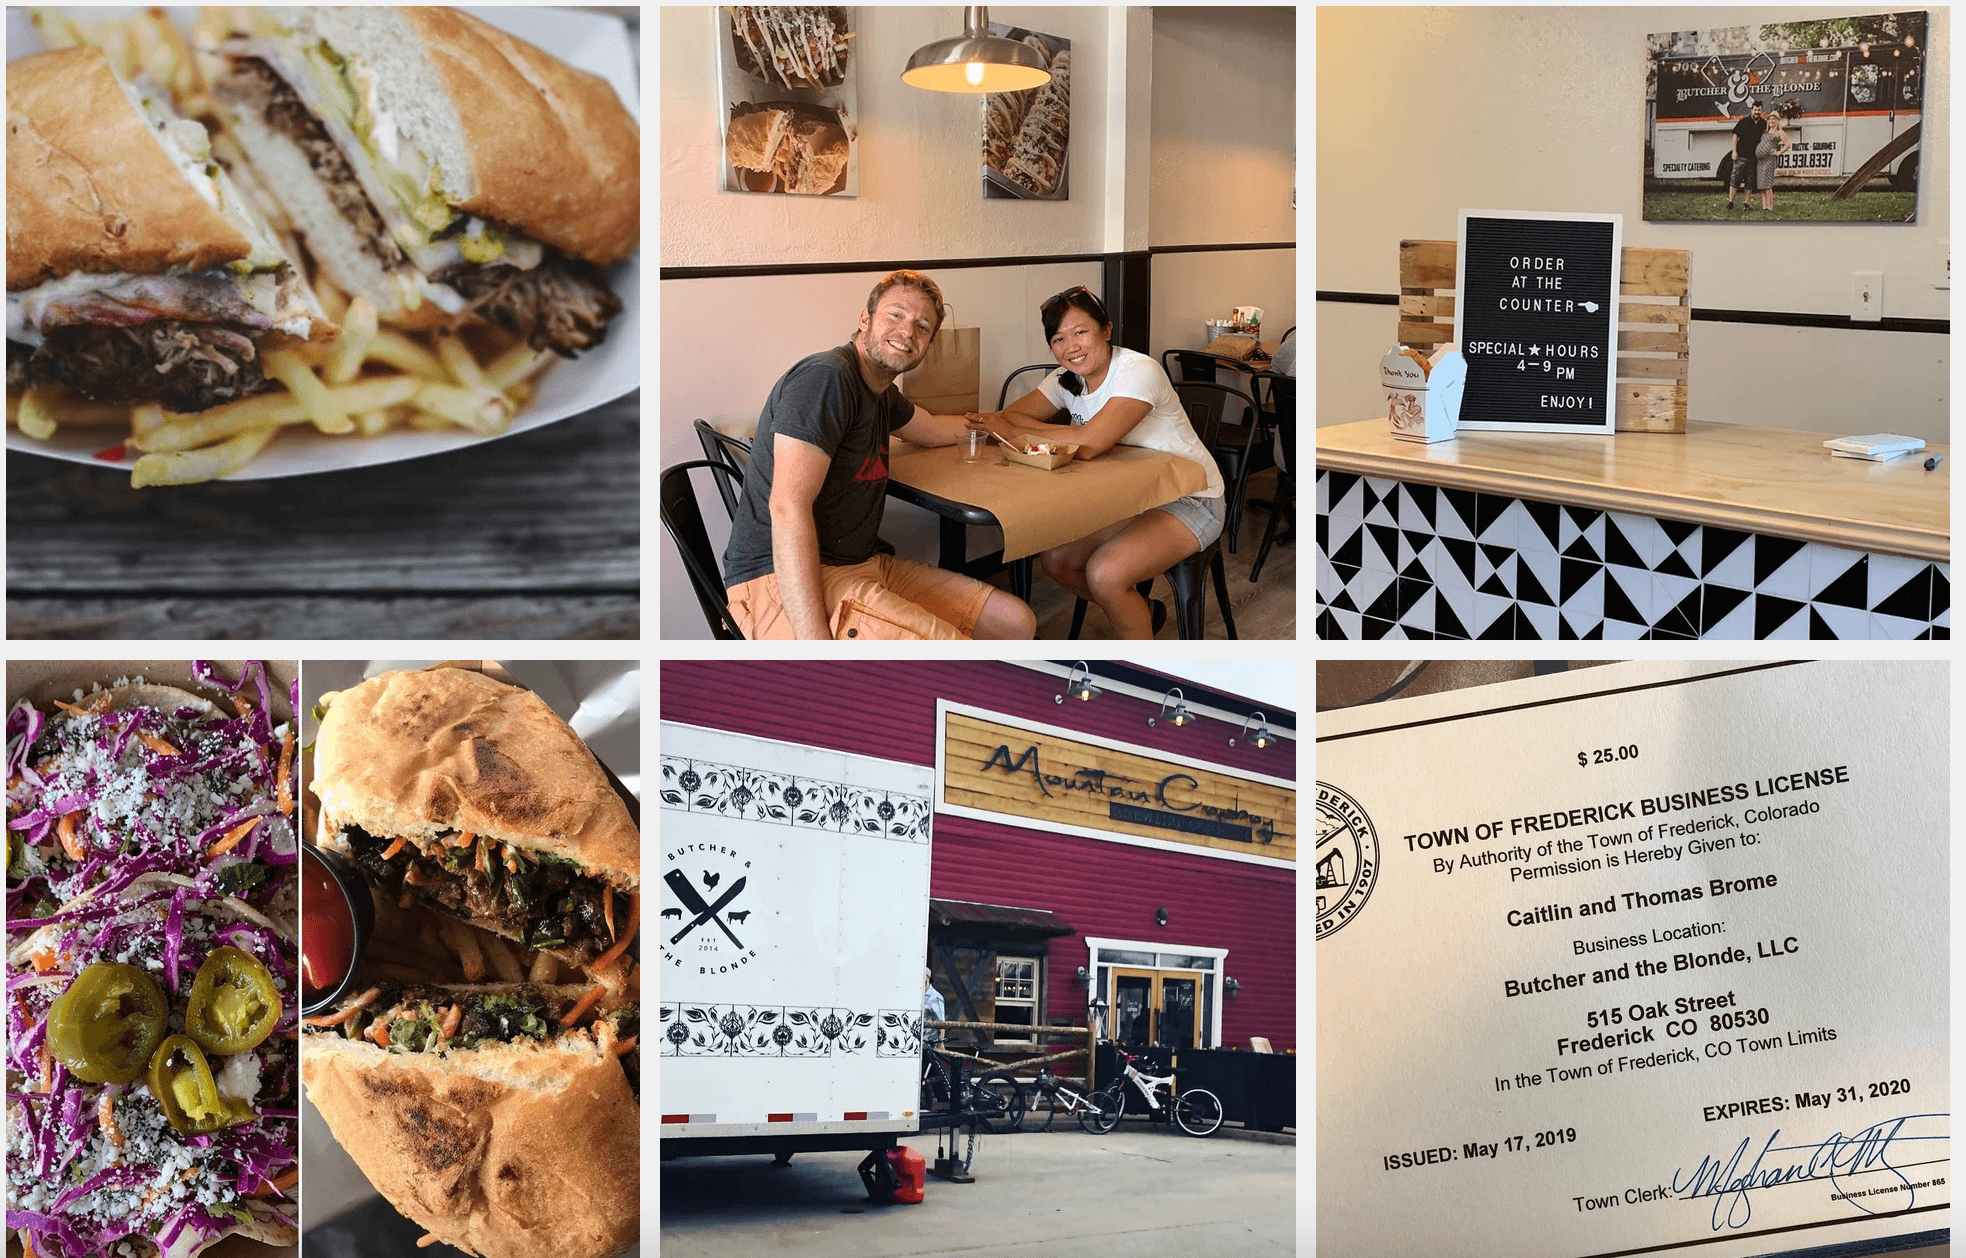 A sample of the photo gallery from The Butcher and the Blonde featuring pictures of food, customers, and their business license